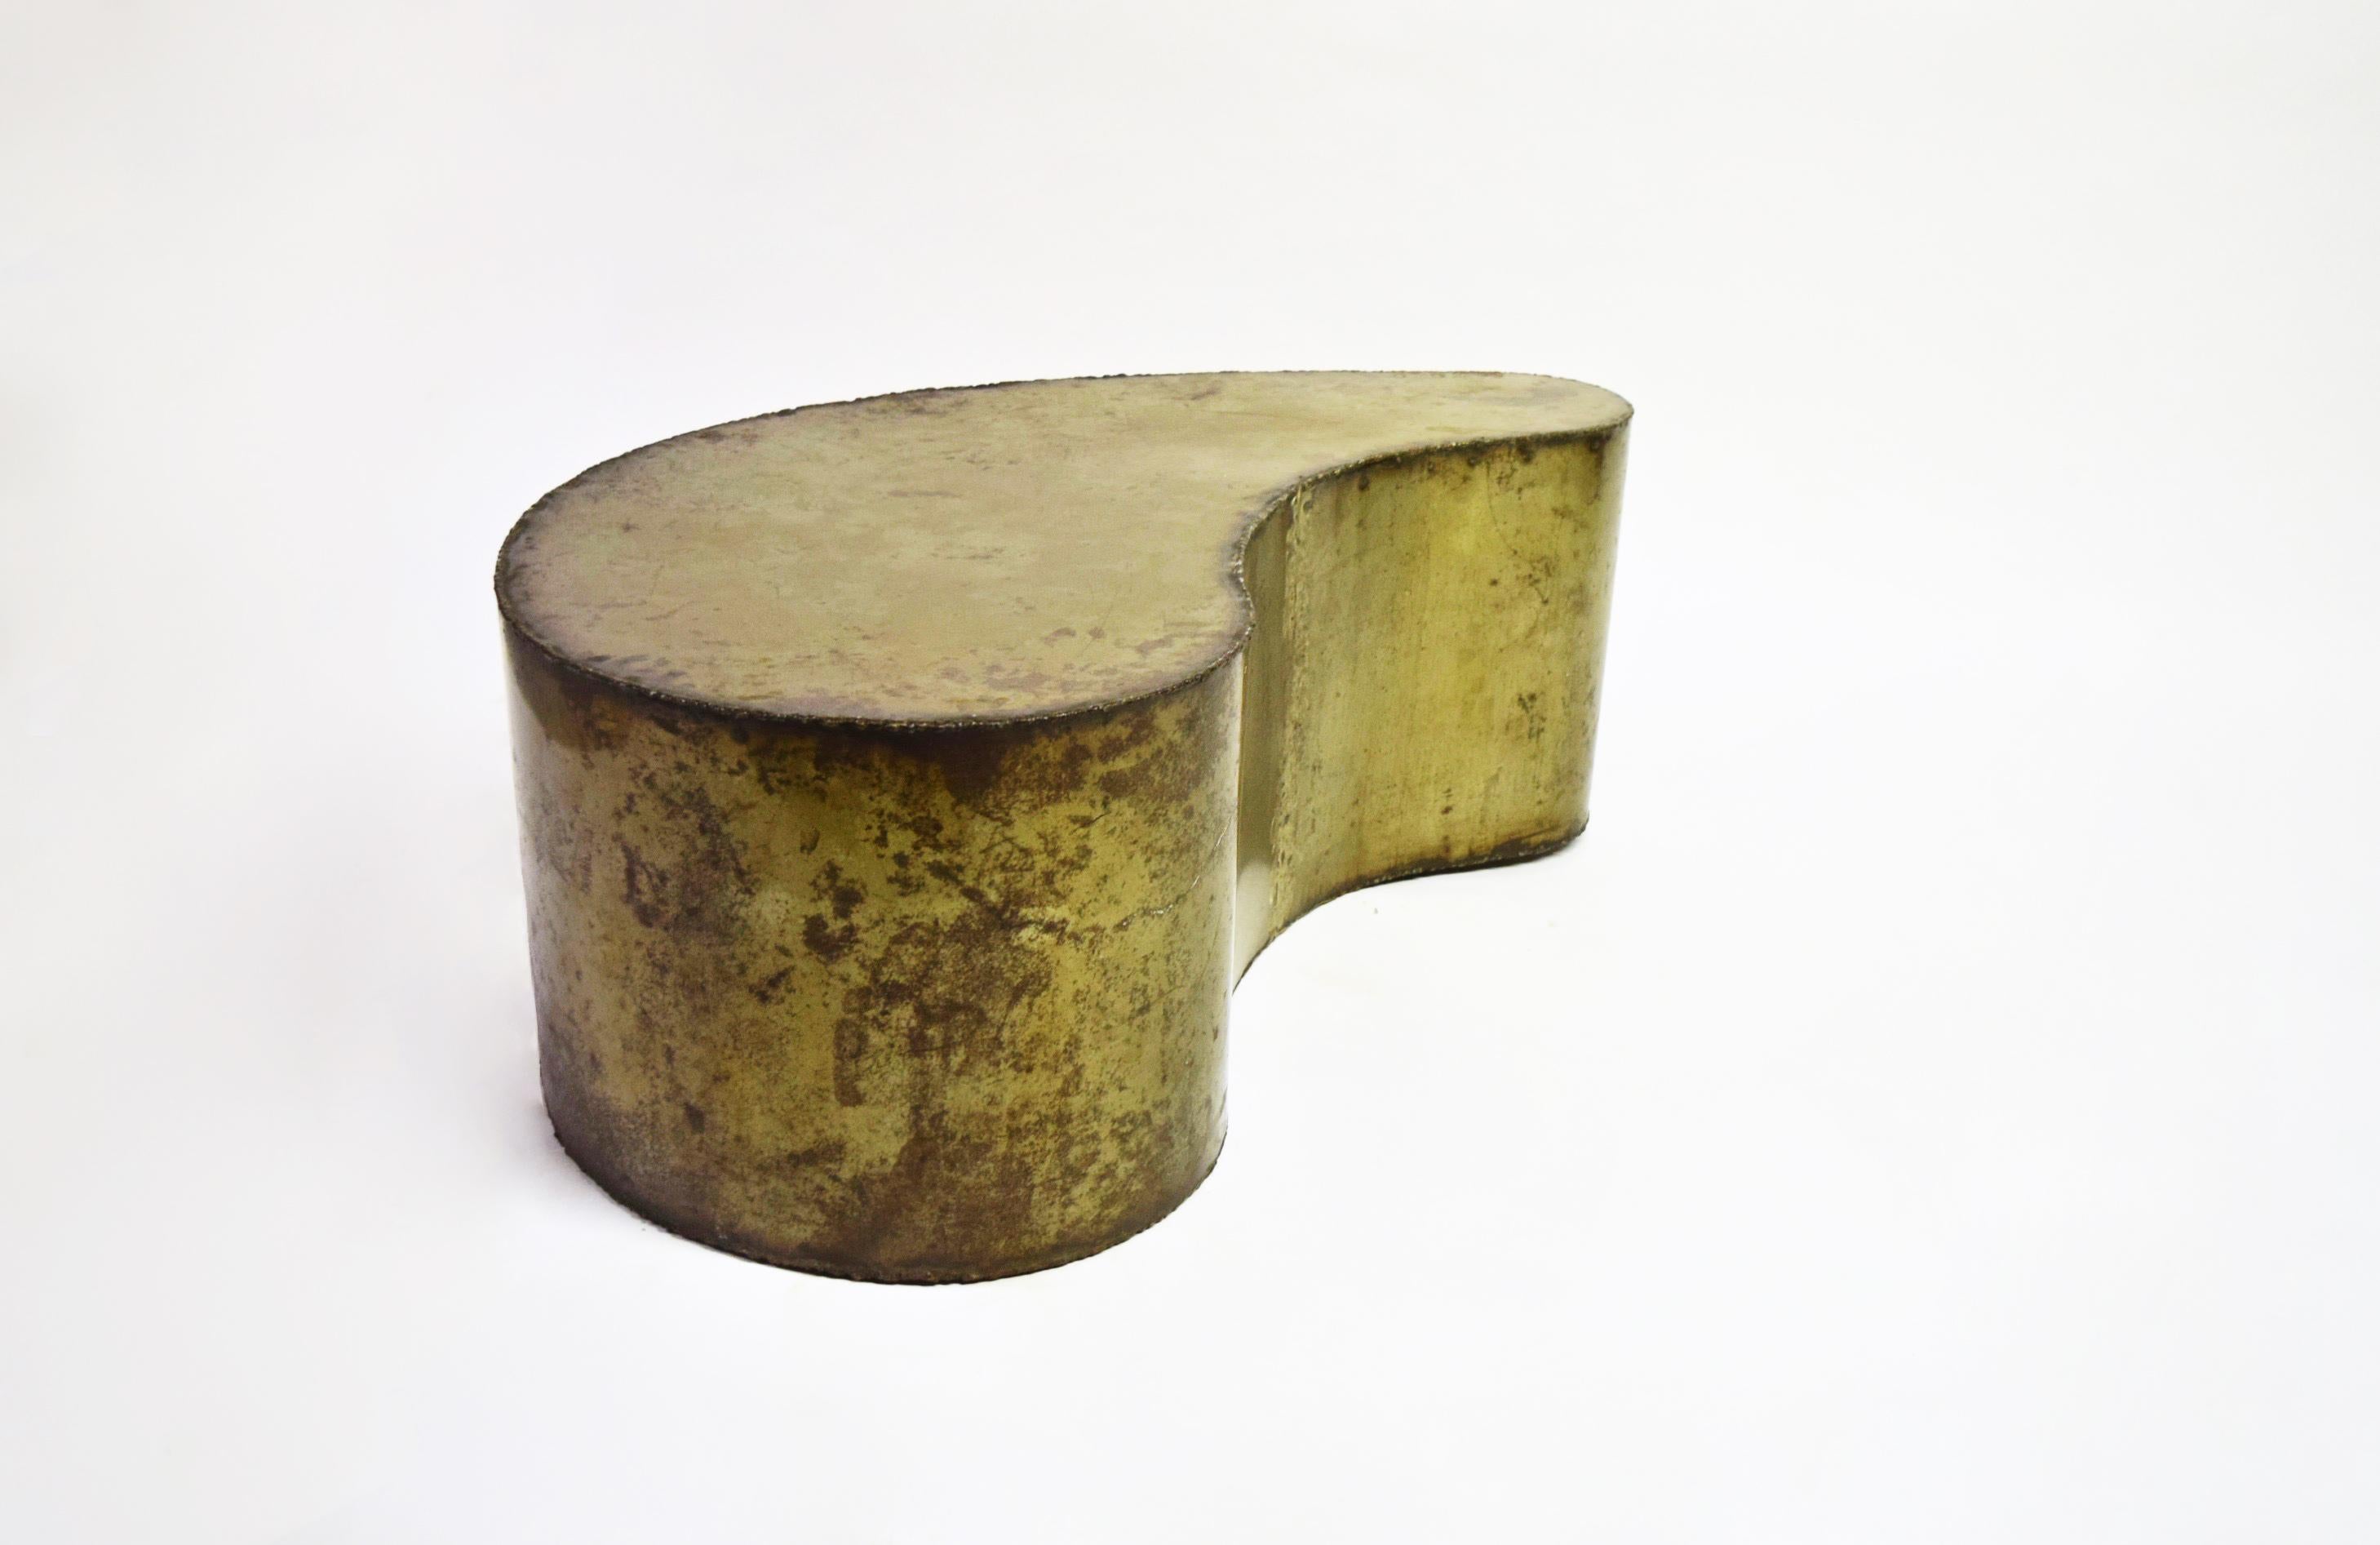 Asymmetrical, kidney-shaped, brutalist coffee table in acid washed metal with raw welding along the edges. The table is finished on both sides as shown.